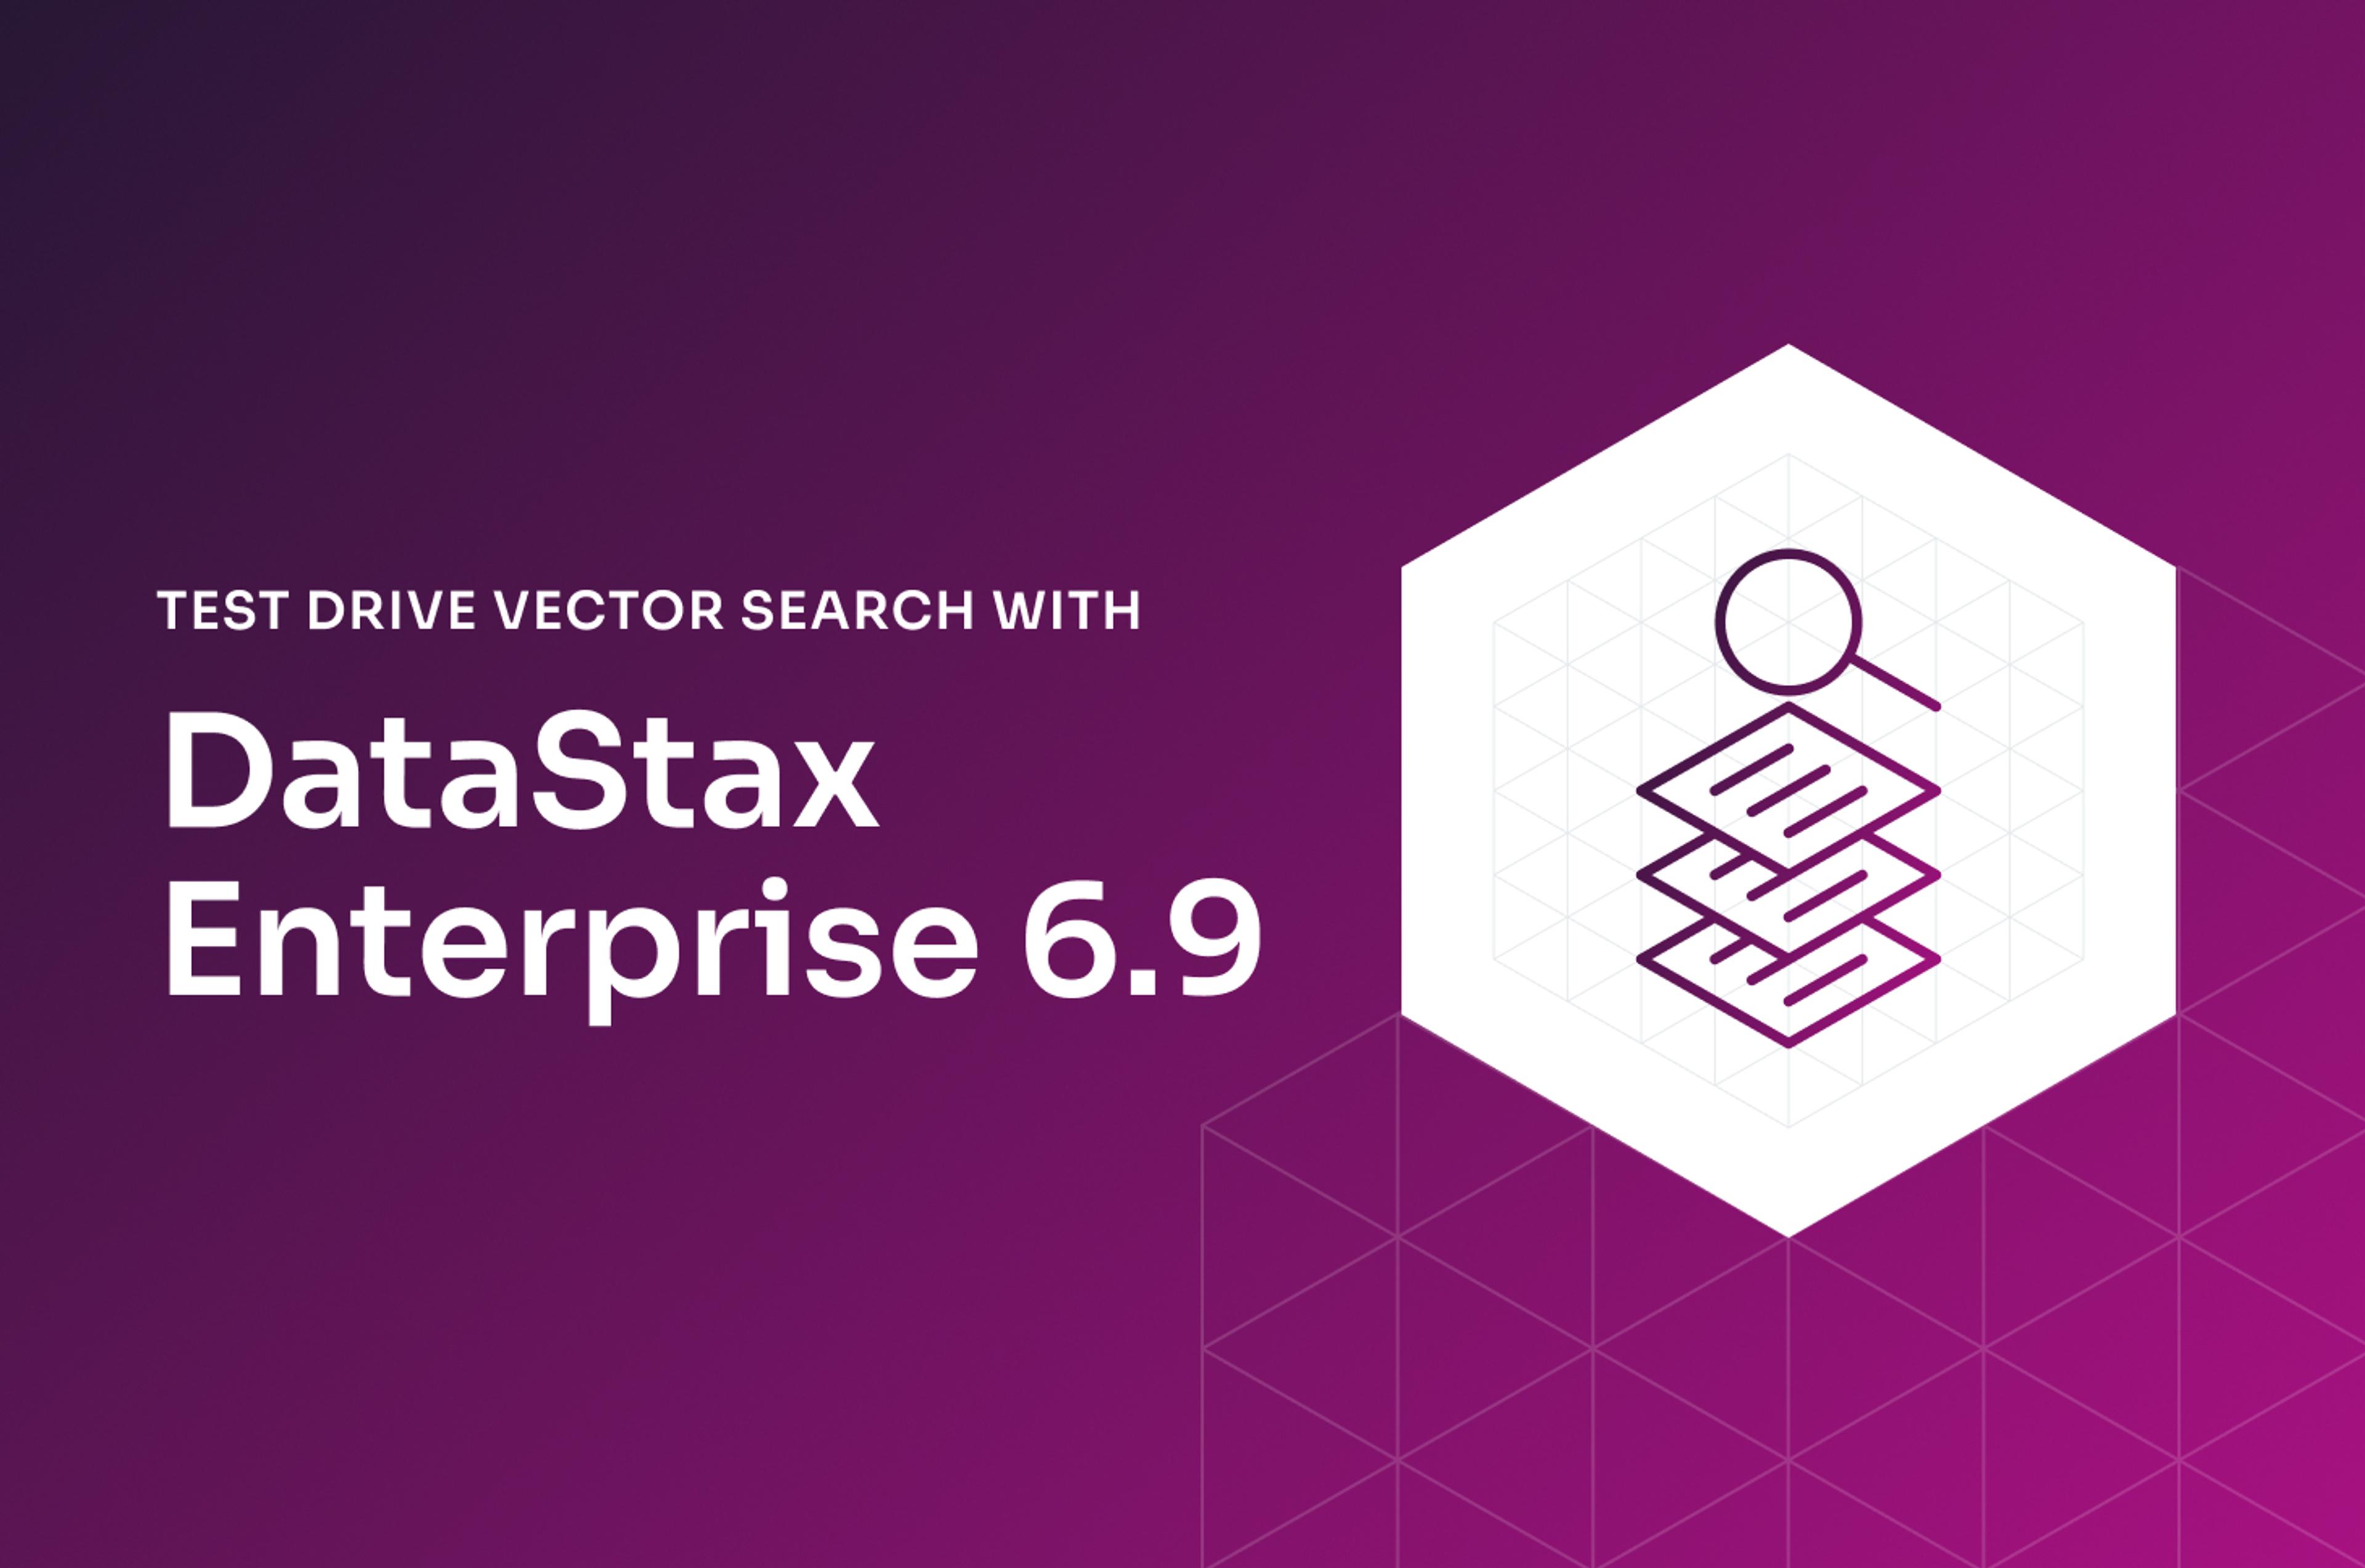 Test Drive Vector Search with DataStax Enterprise 6.9 